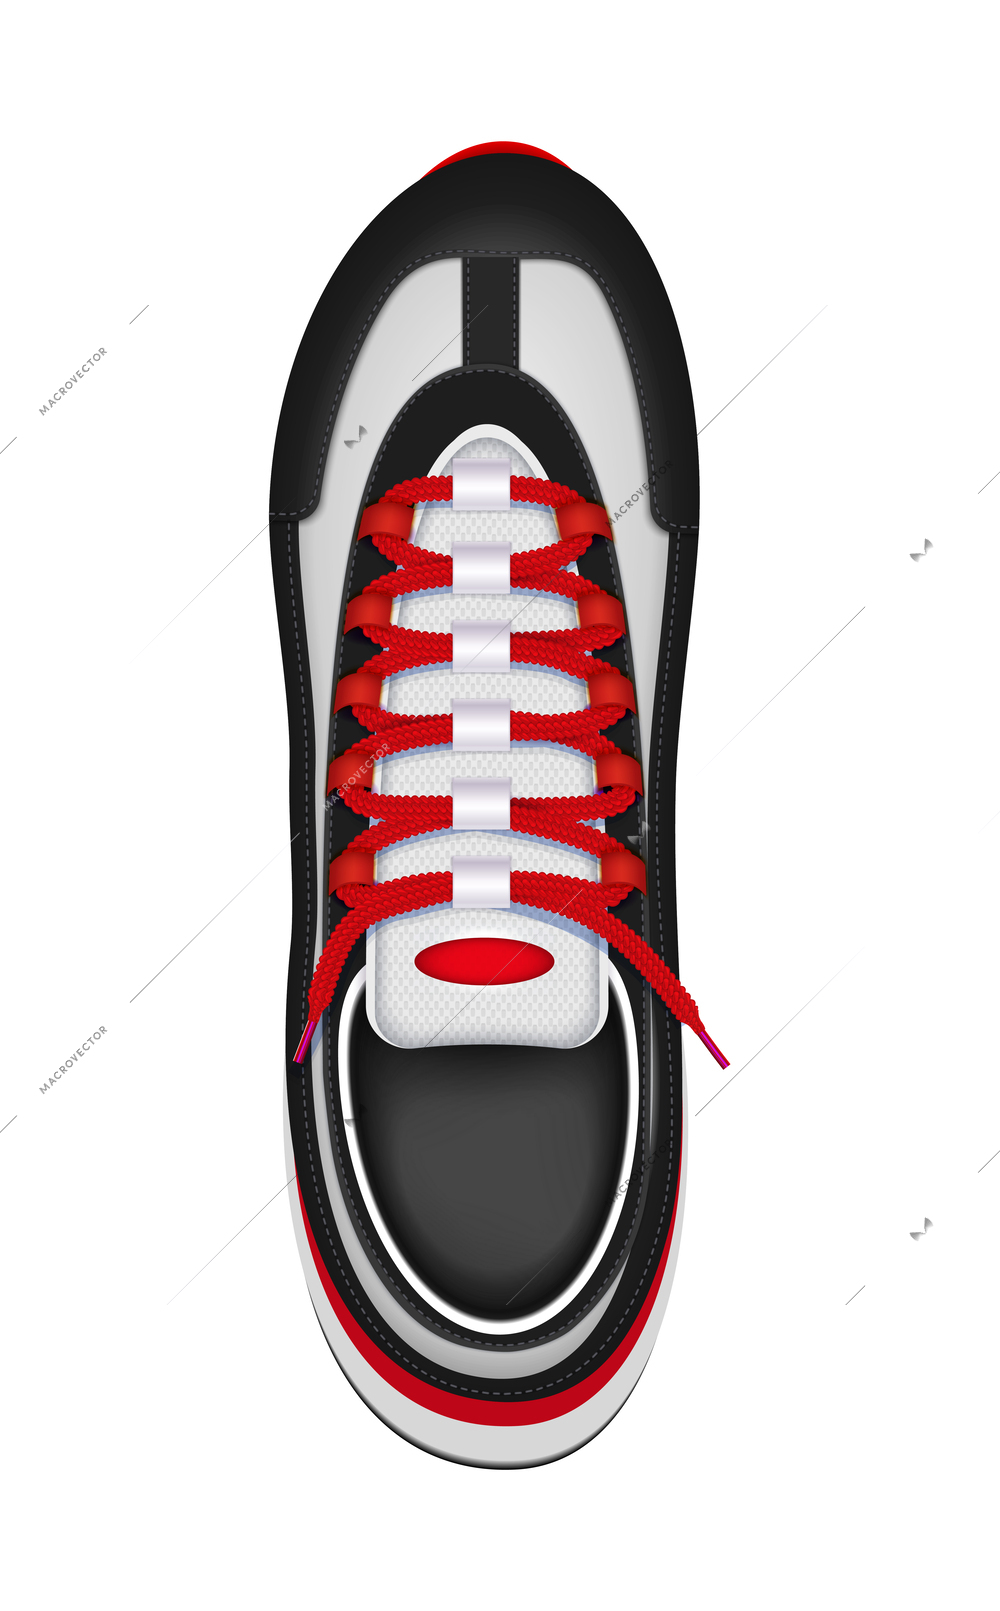 Realistic unisex sport shoe with red shoelaces top view vector illustration